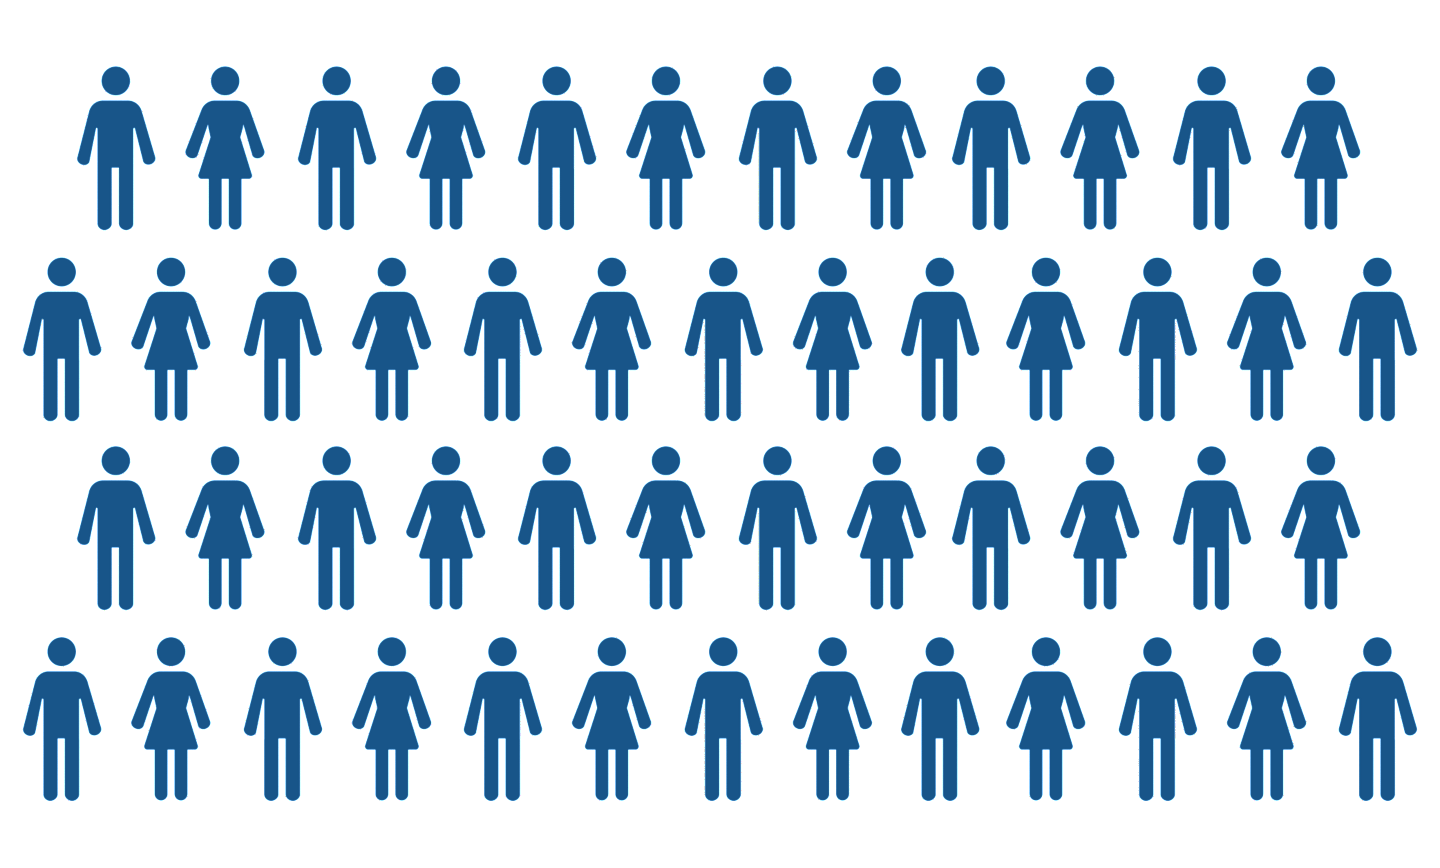 Four rows of blue people icons – both men and women